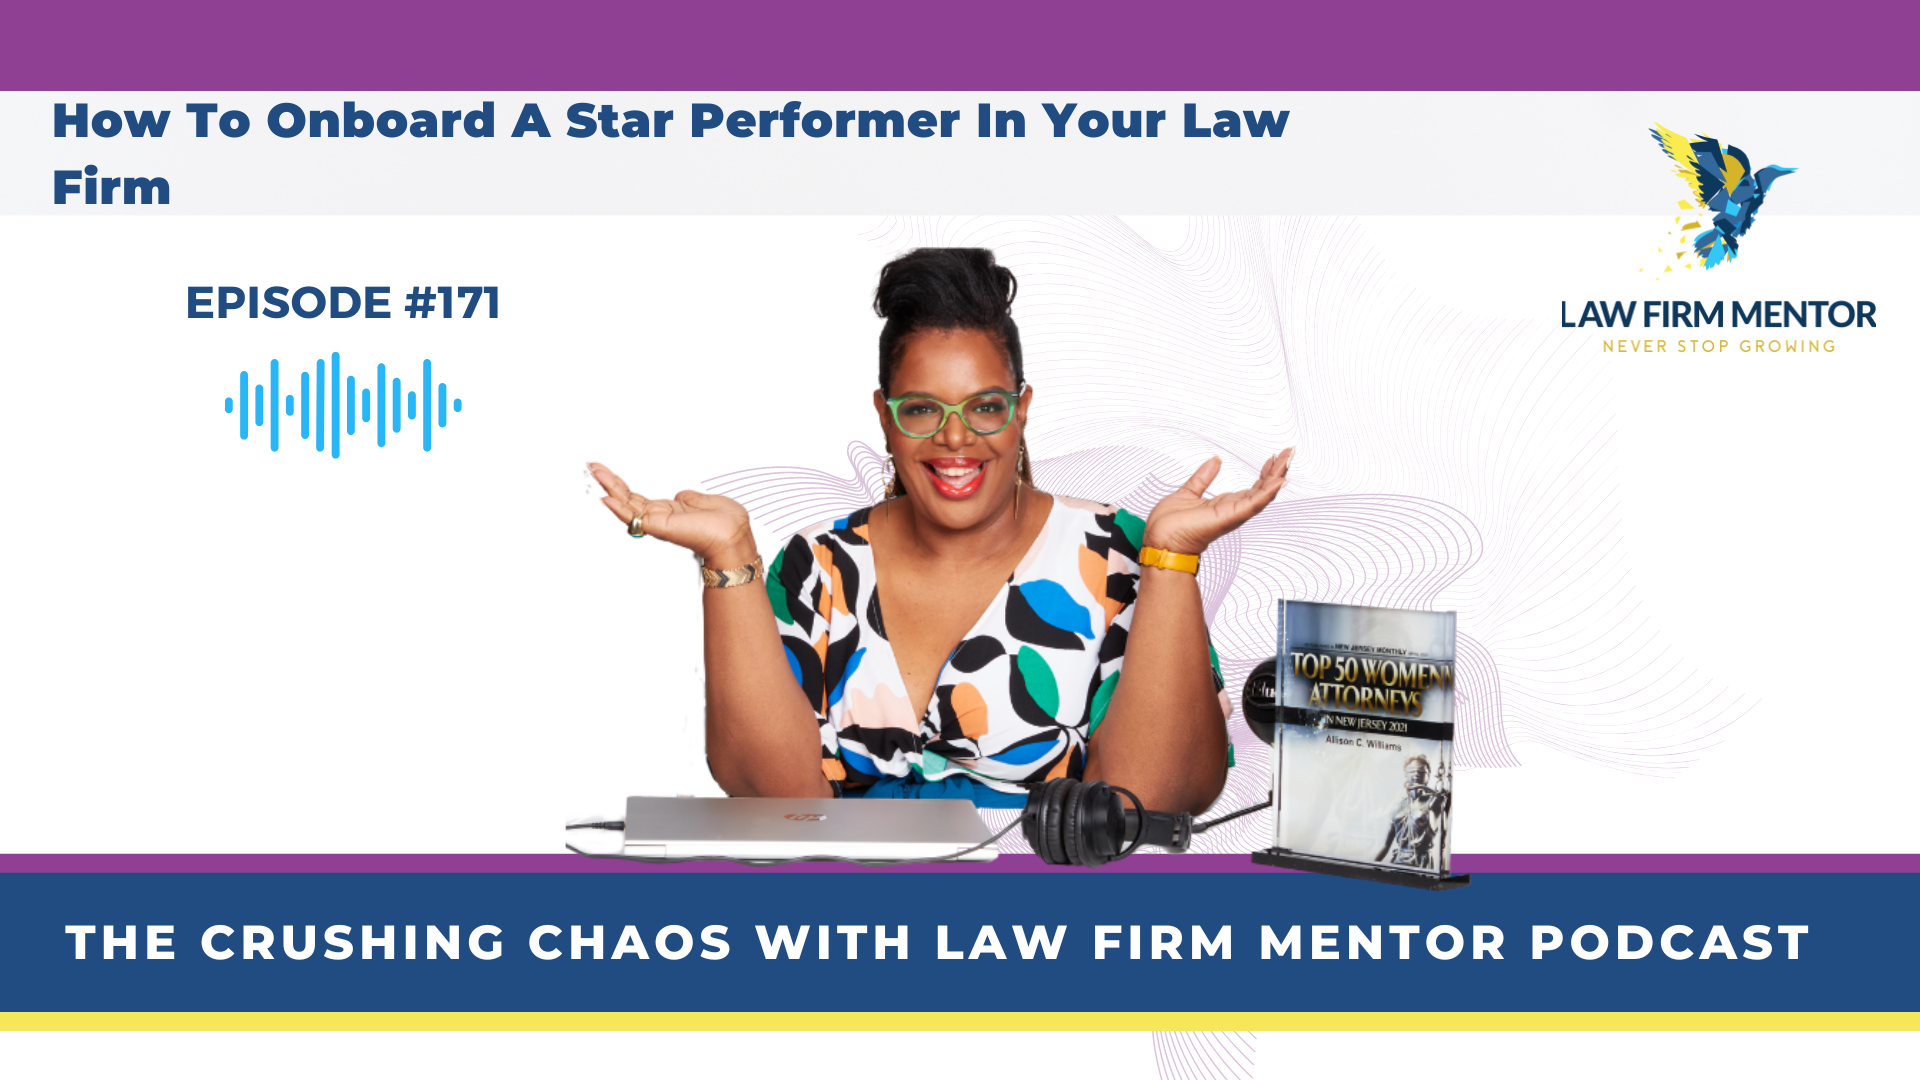 How To Onboard A Star Performer In Your Law Firm